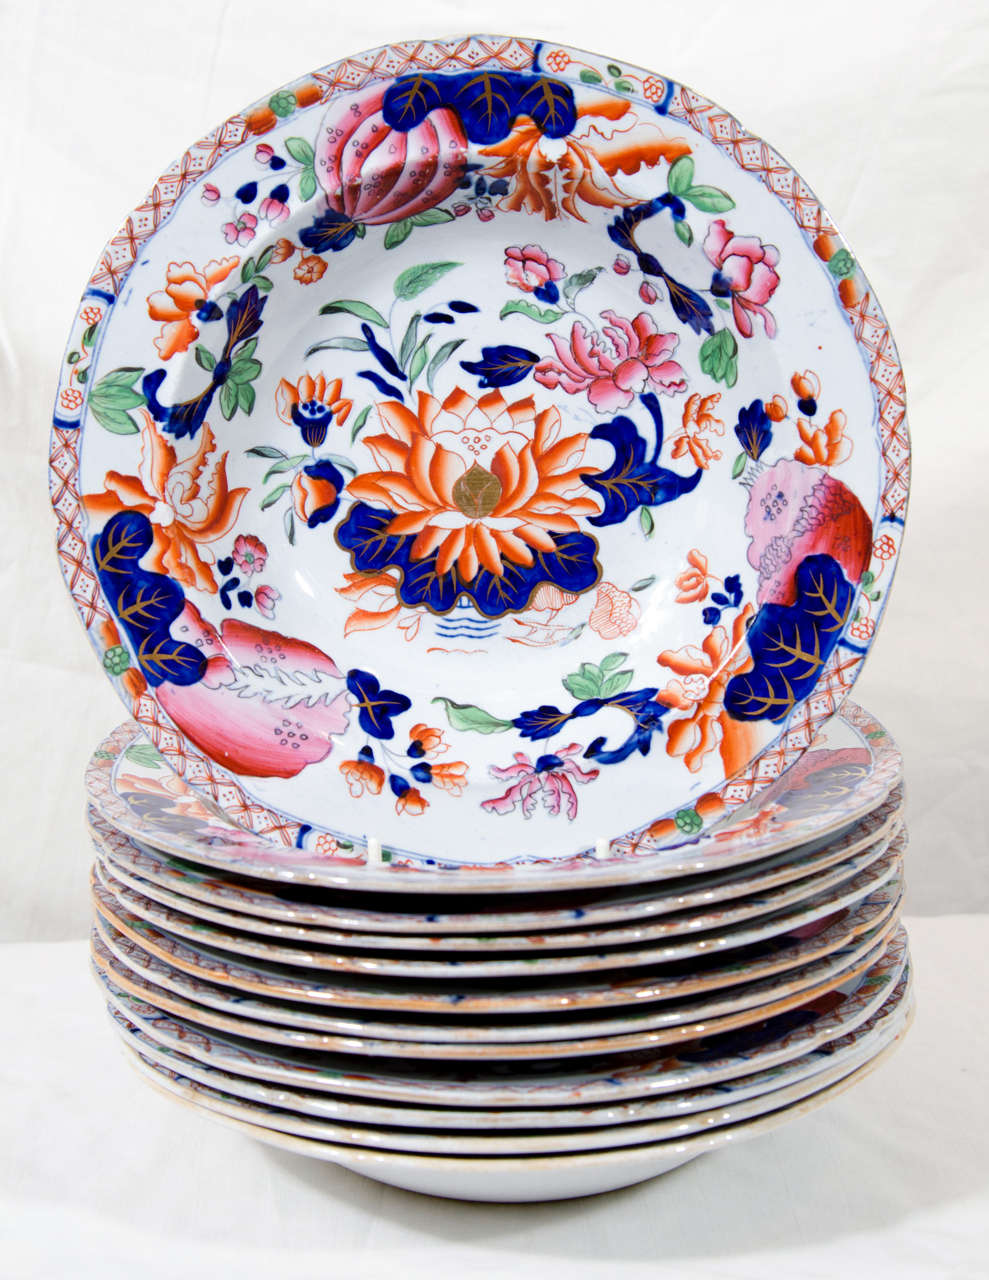 In Chinese tradition the lotus symbolizes longevity, nobility, purity, and harmony. Made by Hicks and Meigh in the early 19th century this lovely English design was inspired by Japanese Imari and Chinese Famille Rose patterns of the 18th century.